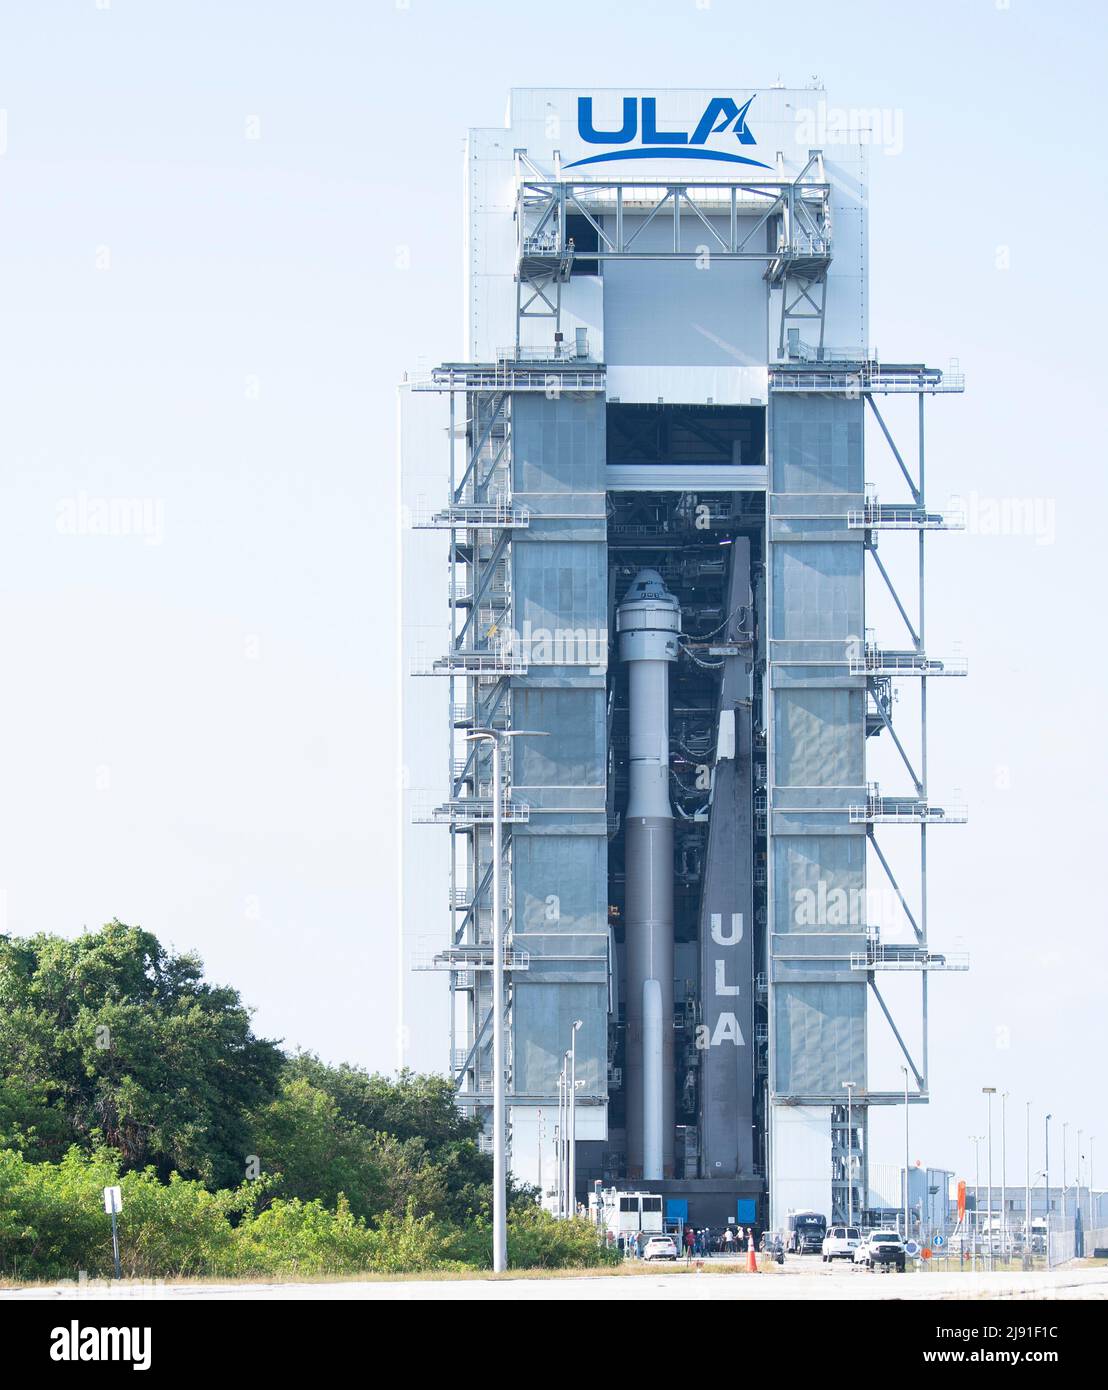 Cape Canaveral, United States of America. 18 May, 2022. The United Launch Alliance Atlas V rocket carrying the Boeing CST-100 Starliner spacecraft aboard begins to roll out from the Vertical Integration Facility at Space Launch Complex 41 in preparation for launch, May 18, 2022 in Cape Canaveral, Florida. The Orbital Flight Test-2 will be second un-crewed flight test and will dock to the International Space Station and is expected to lift off May 19th. Credit: Joel Kowsky/NASA/Alamy Live News Stock Photo